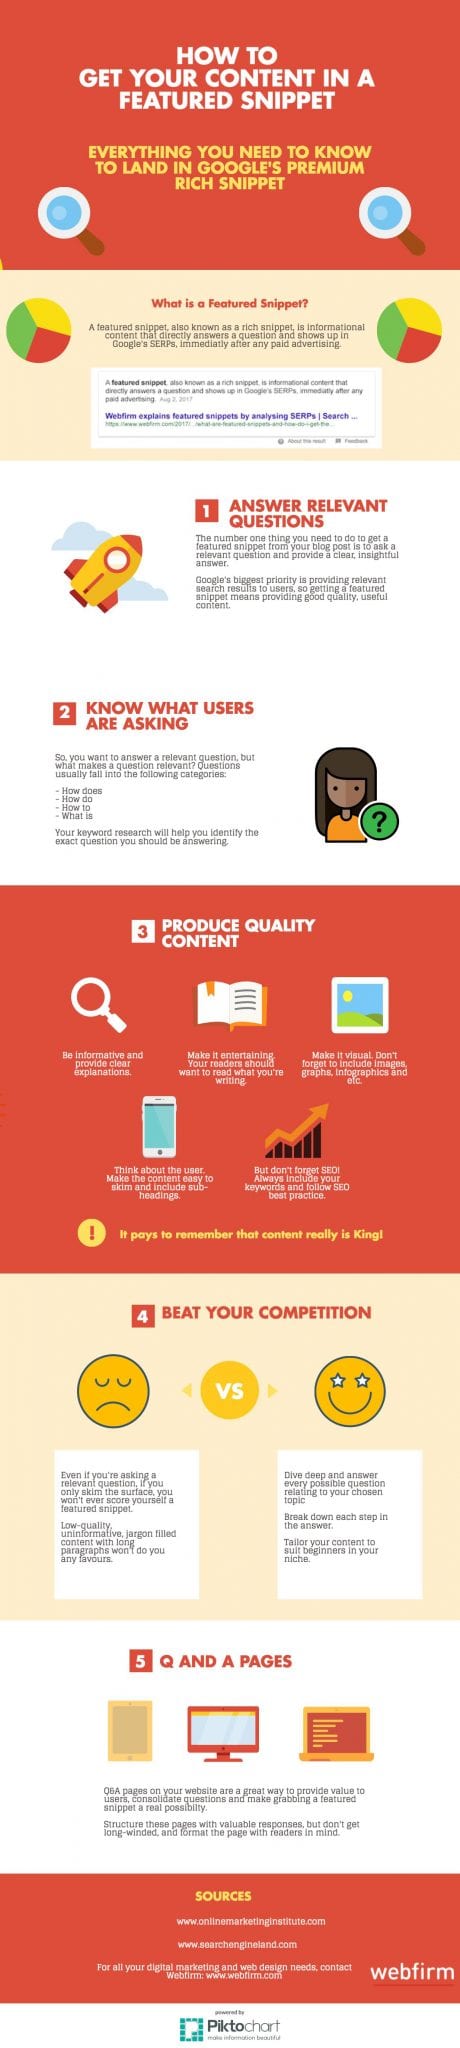 infographic: how to get a featured snippet